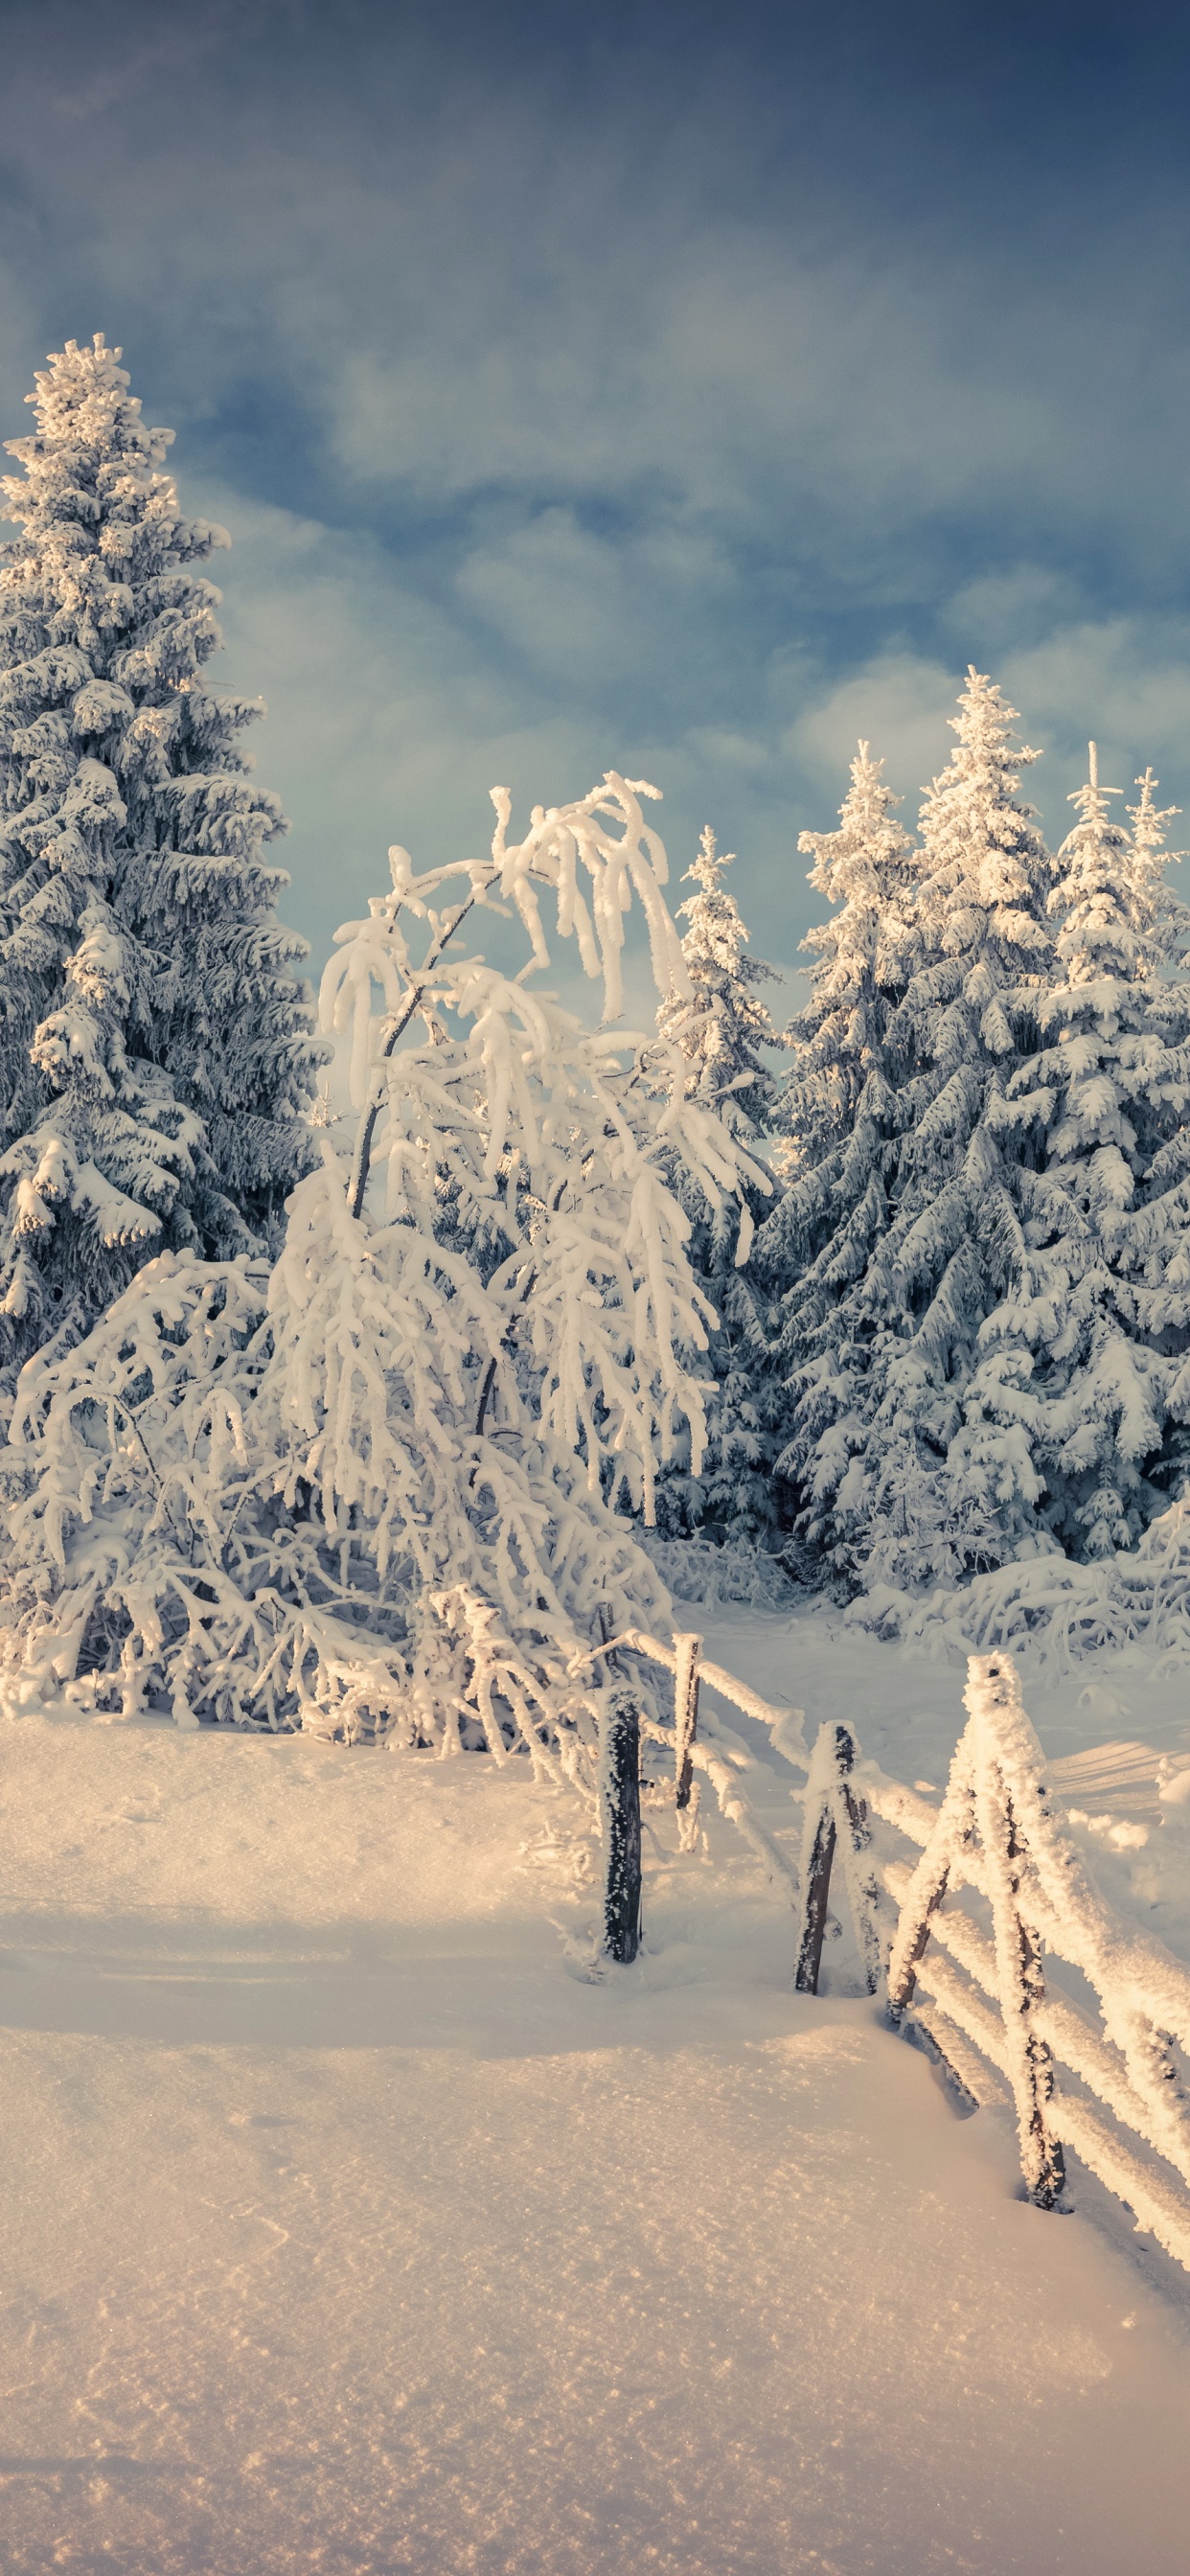 Snow Covered Trees and Mountains During Daytime. Wallpaper in 1242x2688 Resolution